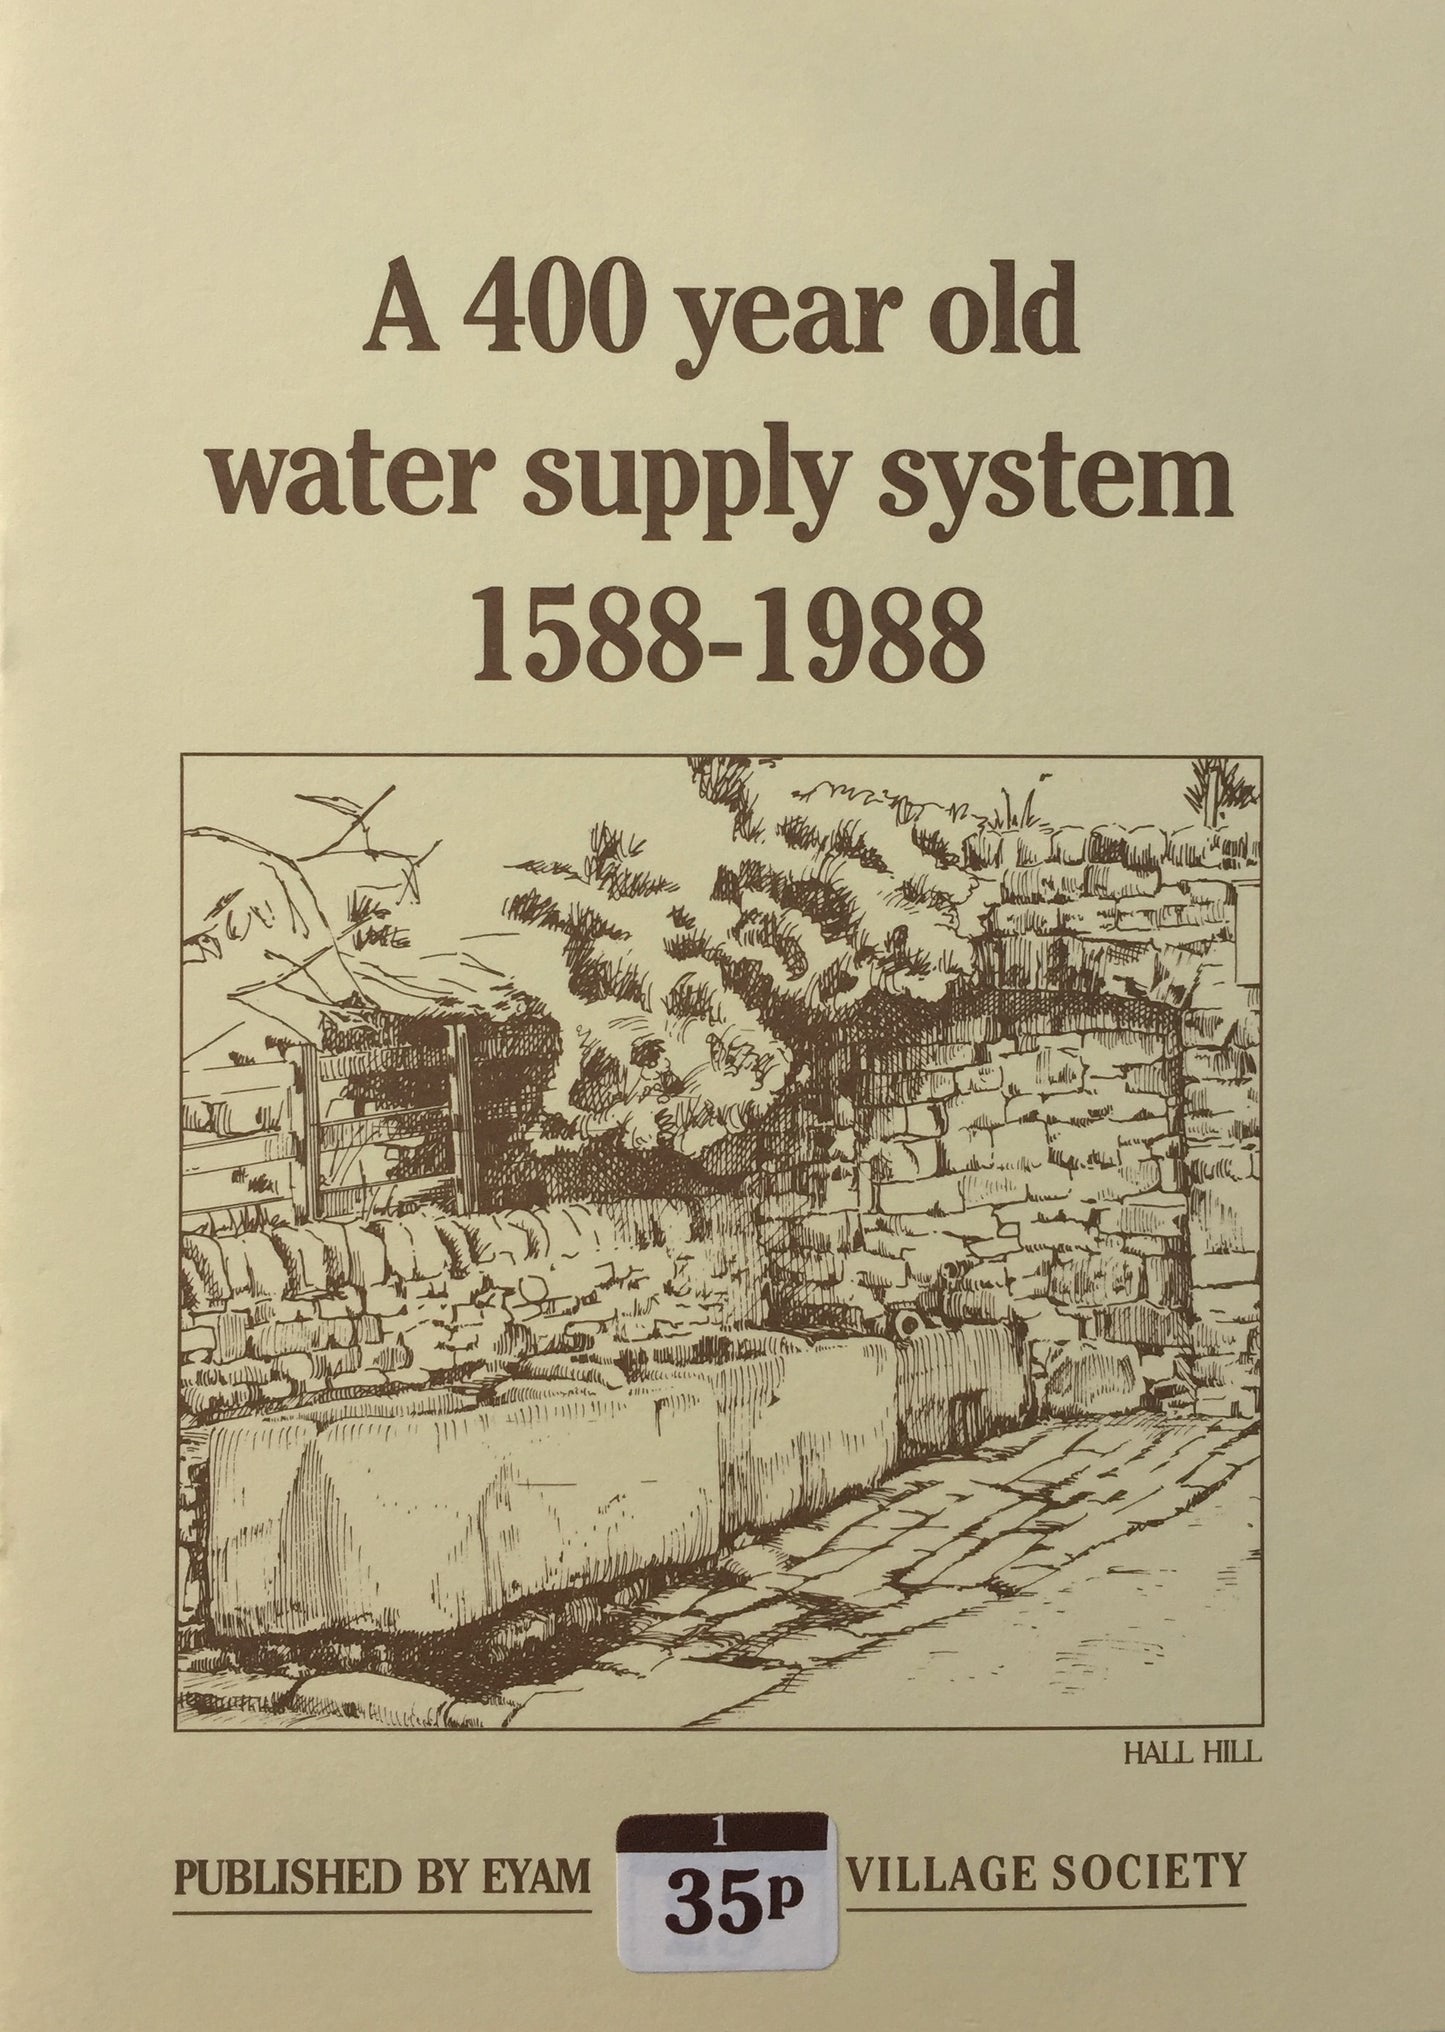 An A5 booklet describing the development of Eyam's water supply system.